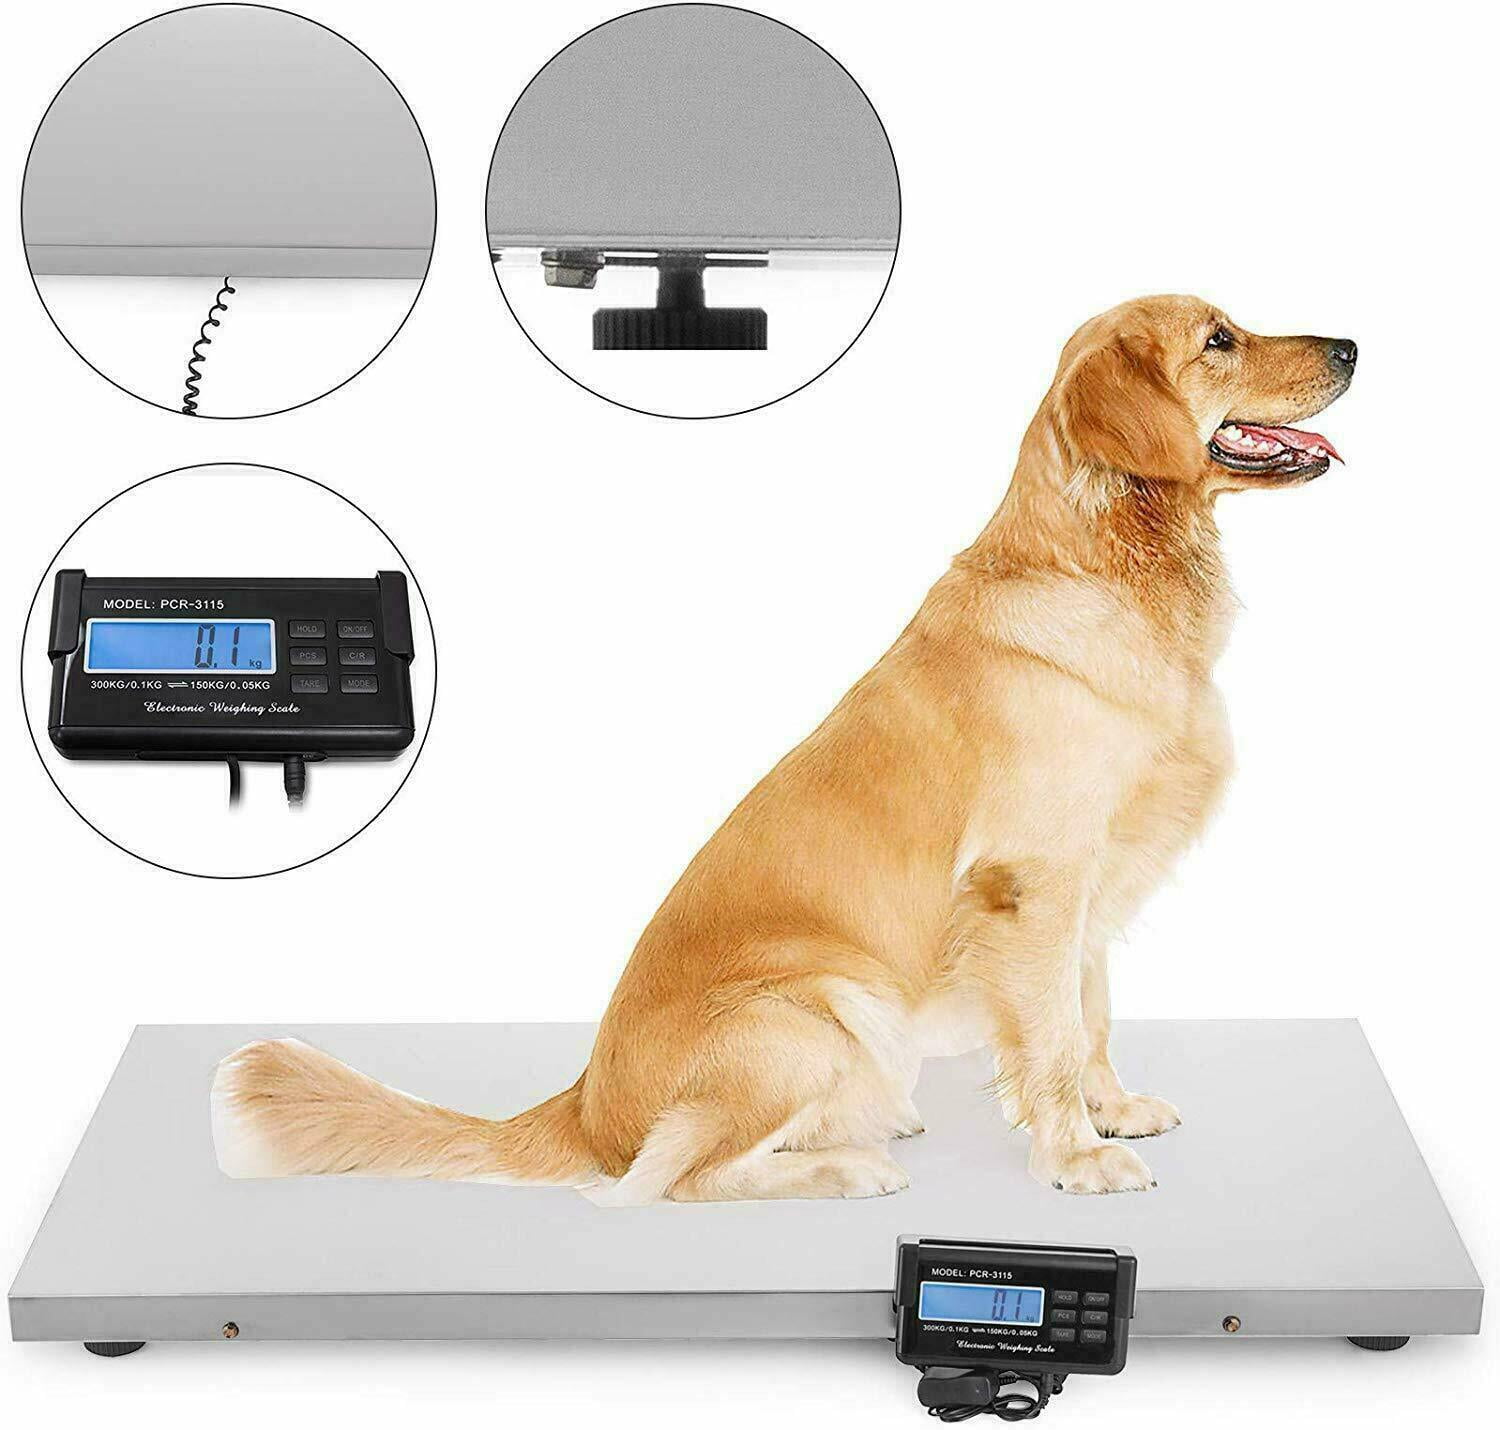 Scales for Weighing Dogs